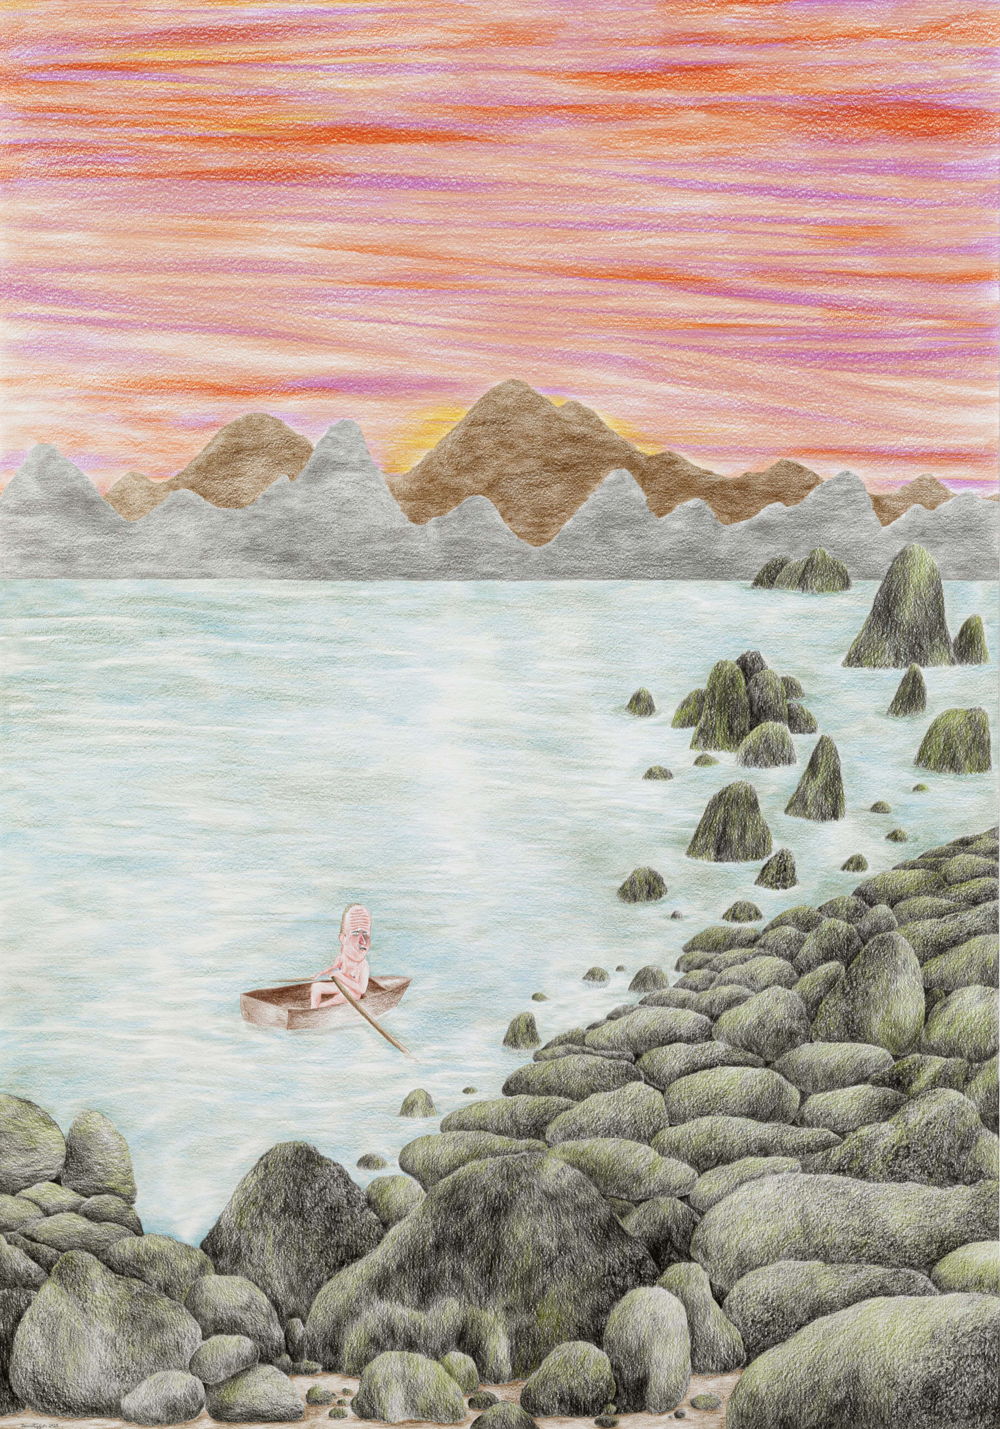 DENNIS TYFUS, Crap! Wrong Island!, 2021. Colored pencil on paper, 100 x 70 cm